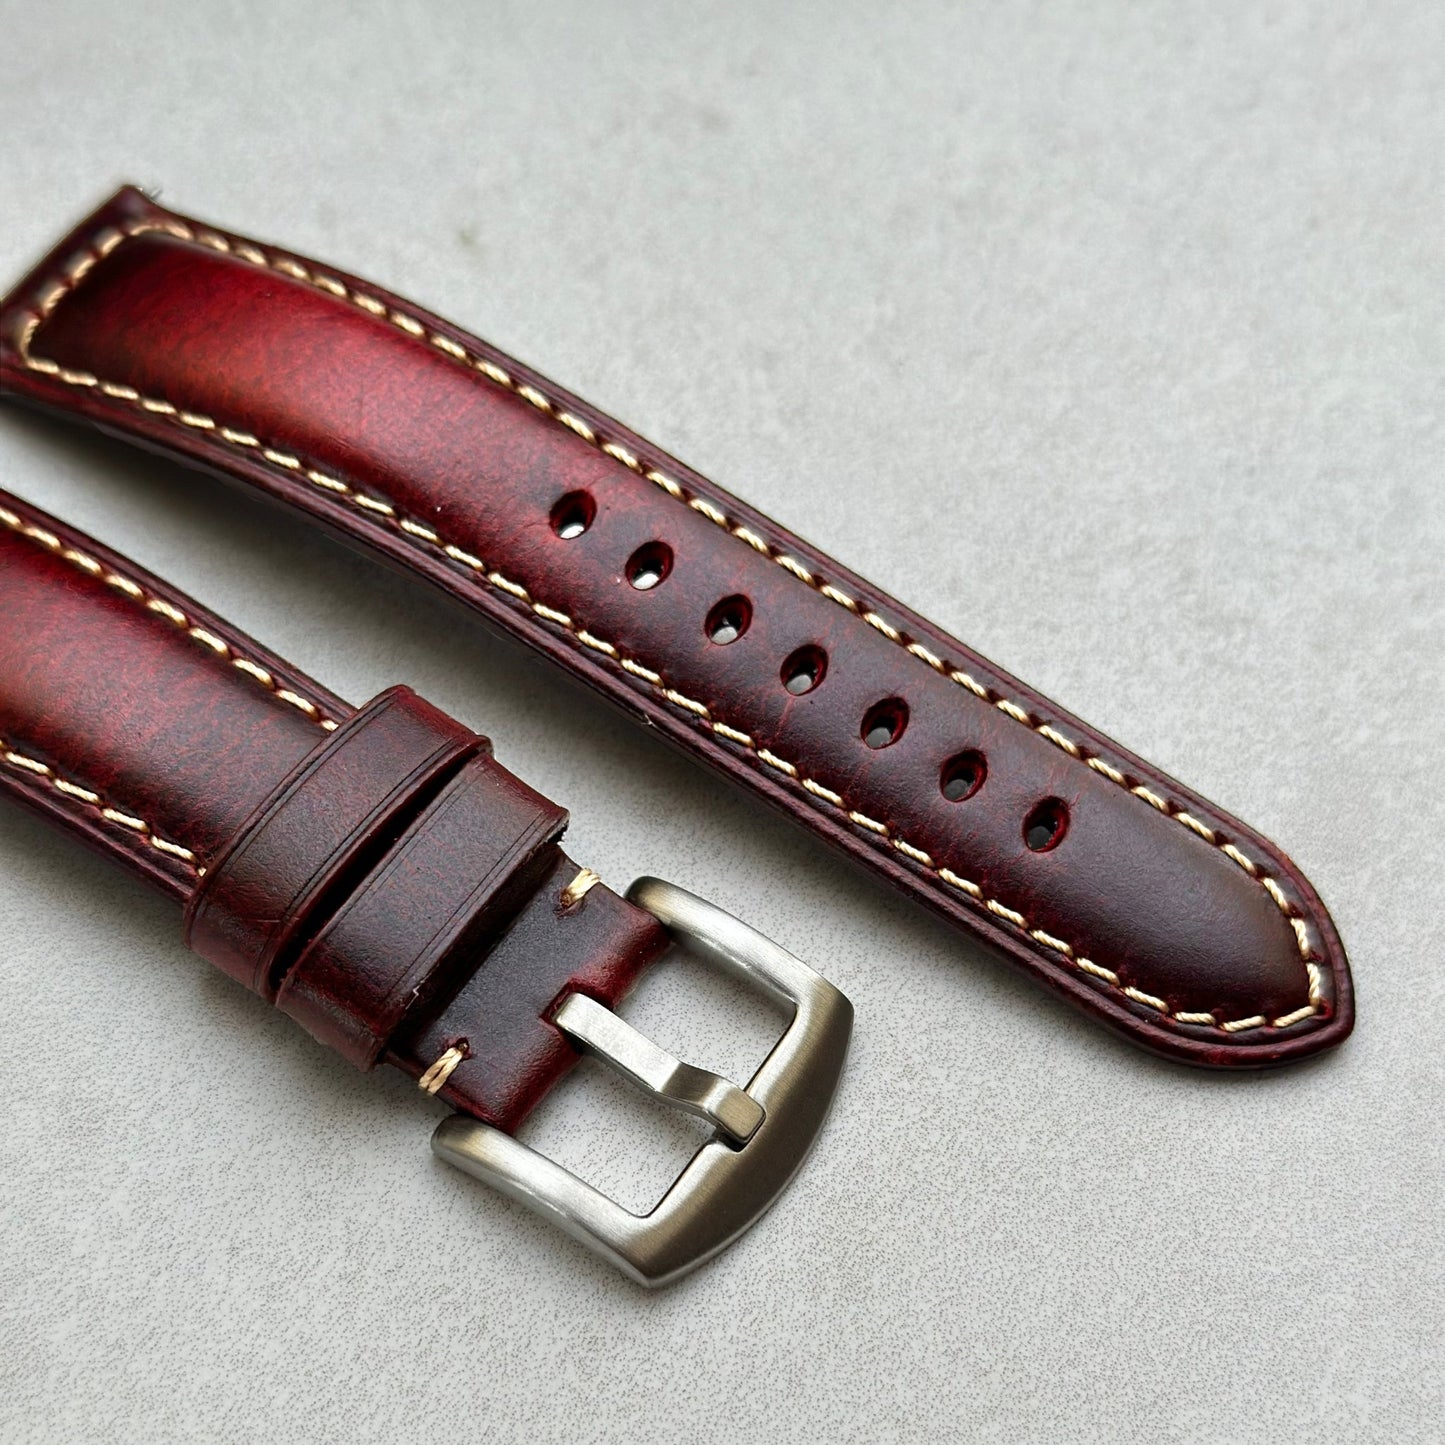 Brushed 316L stainless steel buckle on the Berlin burgundy full grain leather watch strap.